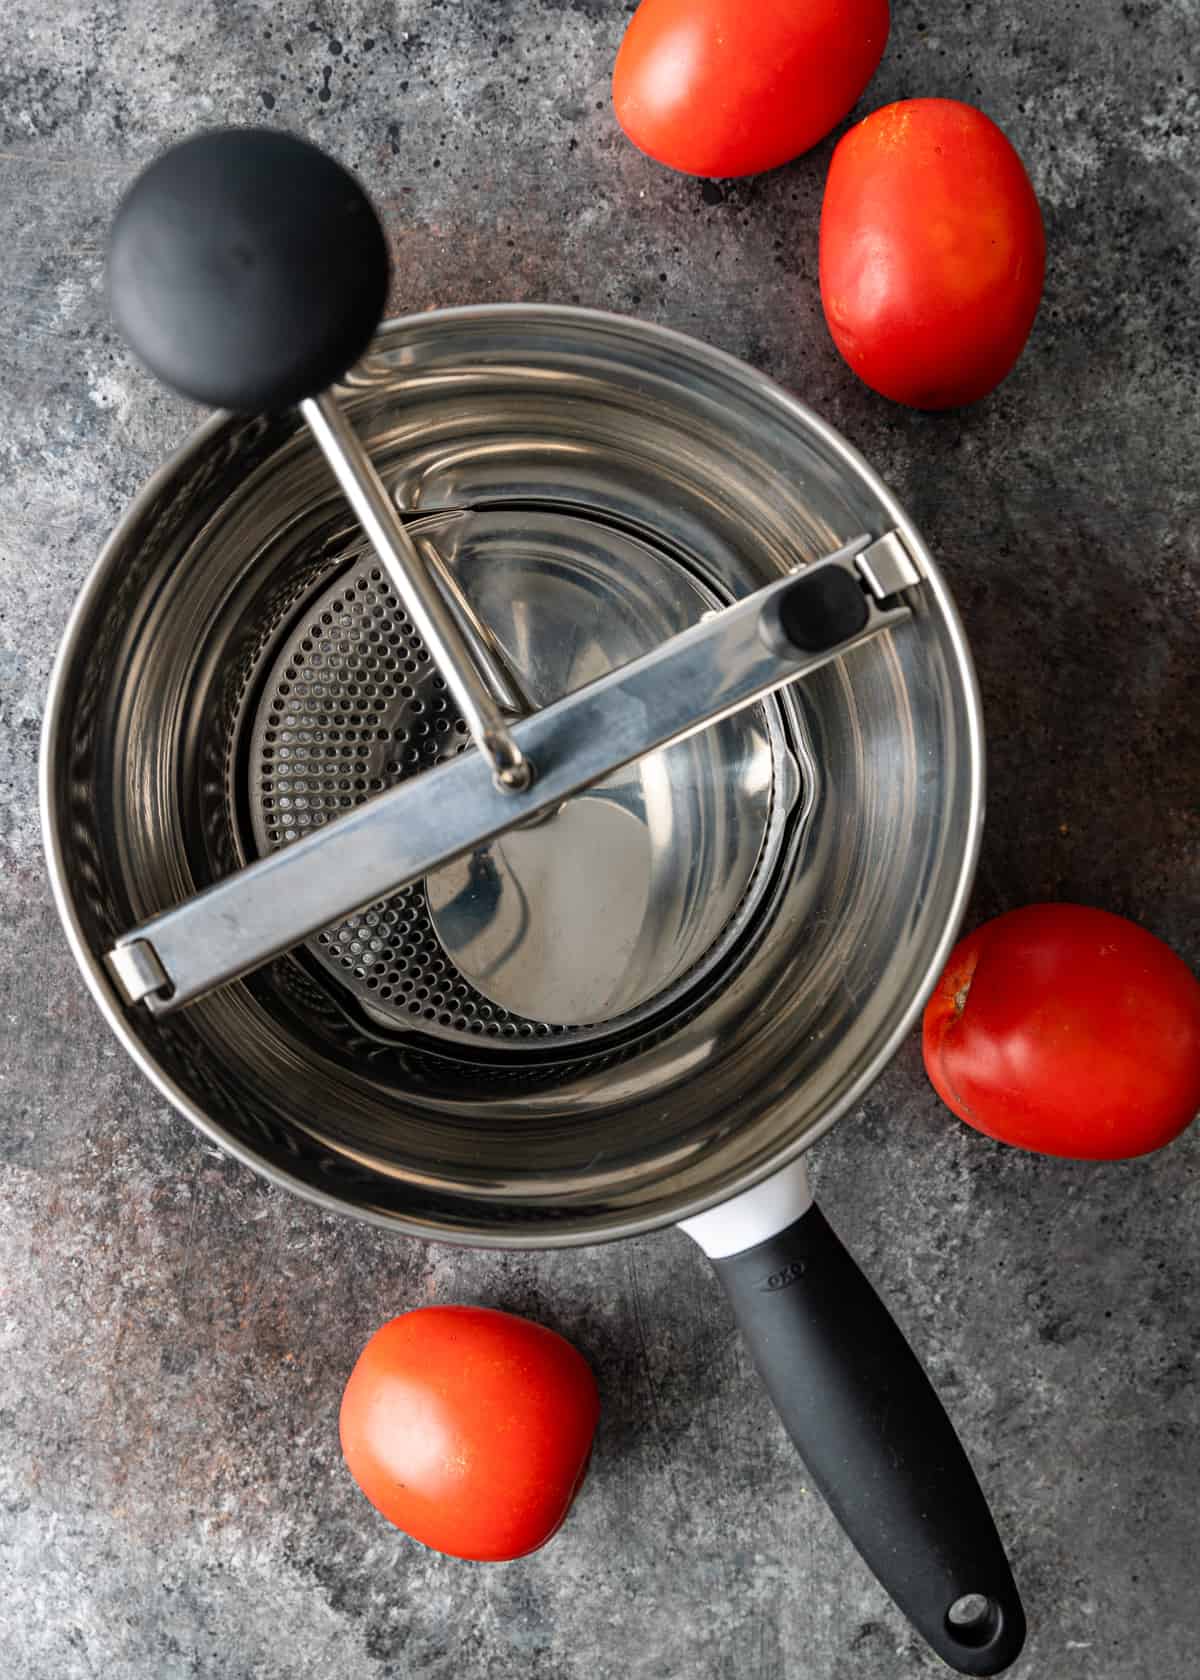 manual strainer with tomatoes